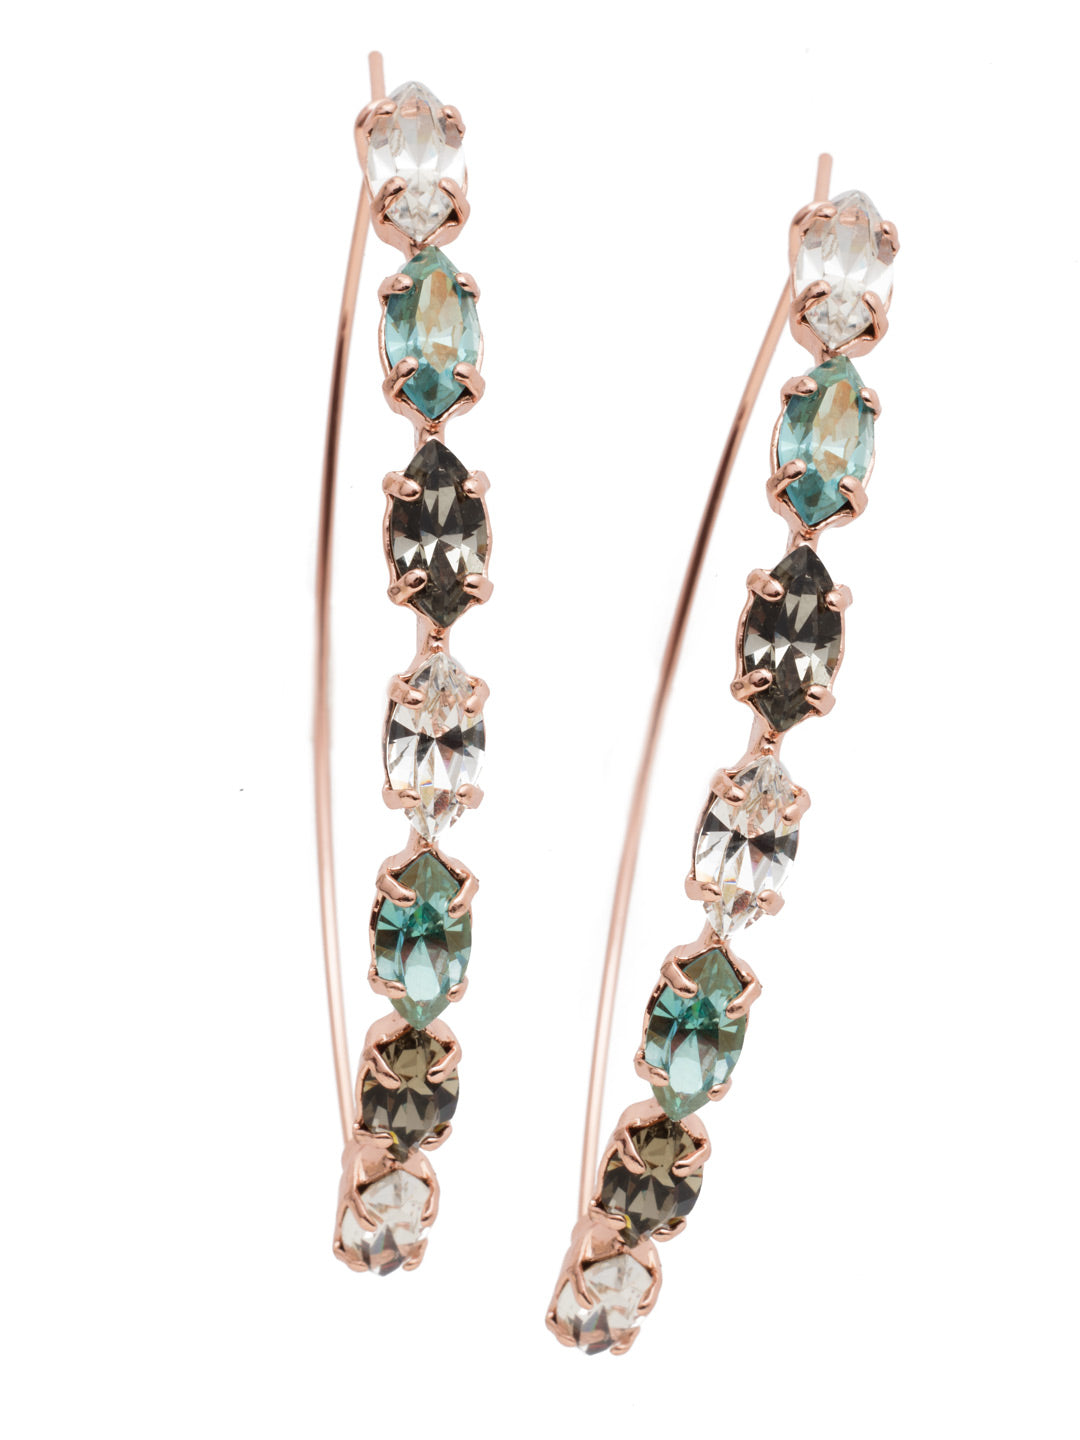 Vera Hoop Earrings - EEP6RGCAZ - The Vera Hoop Earrings aren't your average hoops. A thin, single metal teardrop strand holds dynamic navette crystal sparkling pieces in various shades, making this pair a stand-out. From Sorrelli's Crystal Azure collection in our Rose Gold-tone finish.